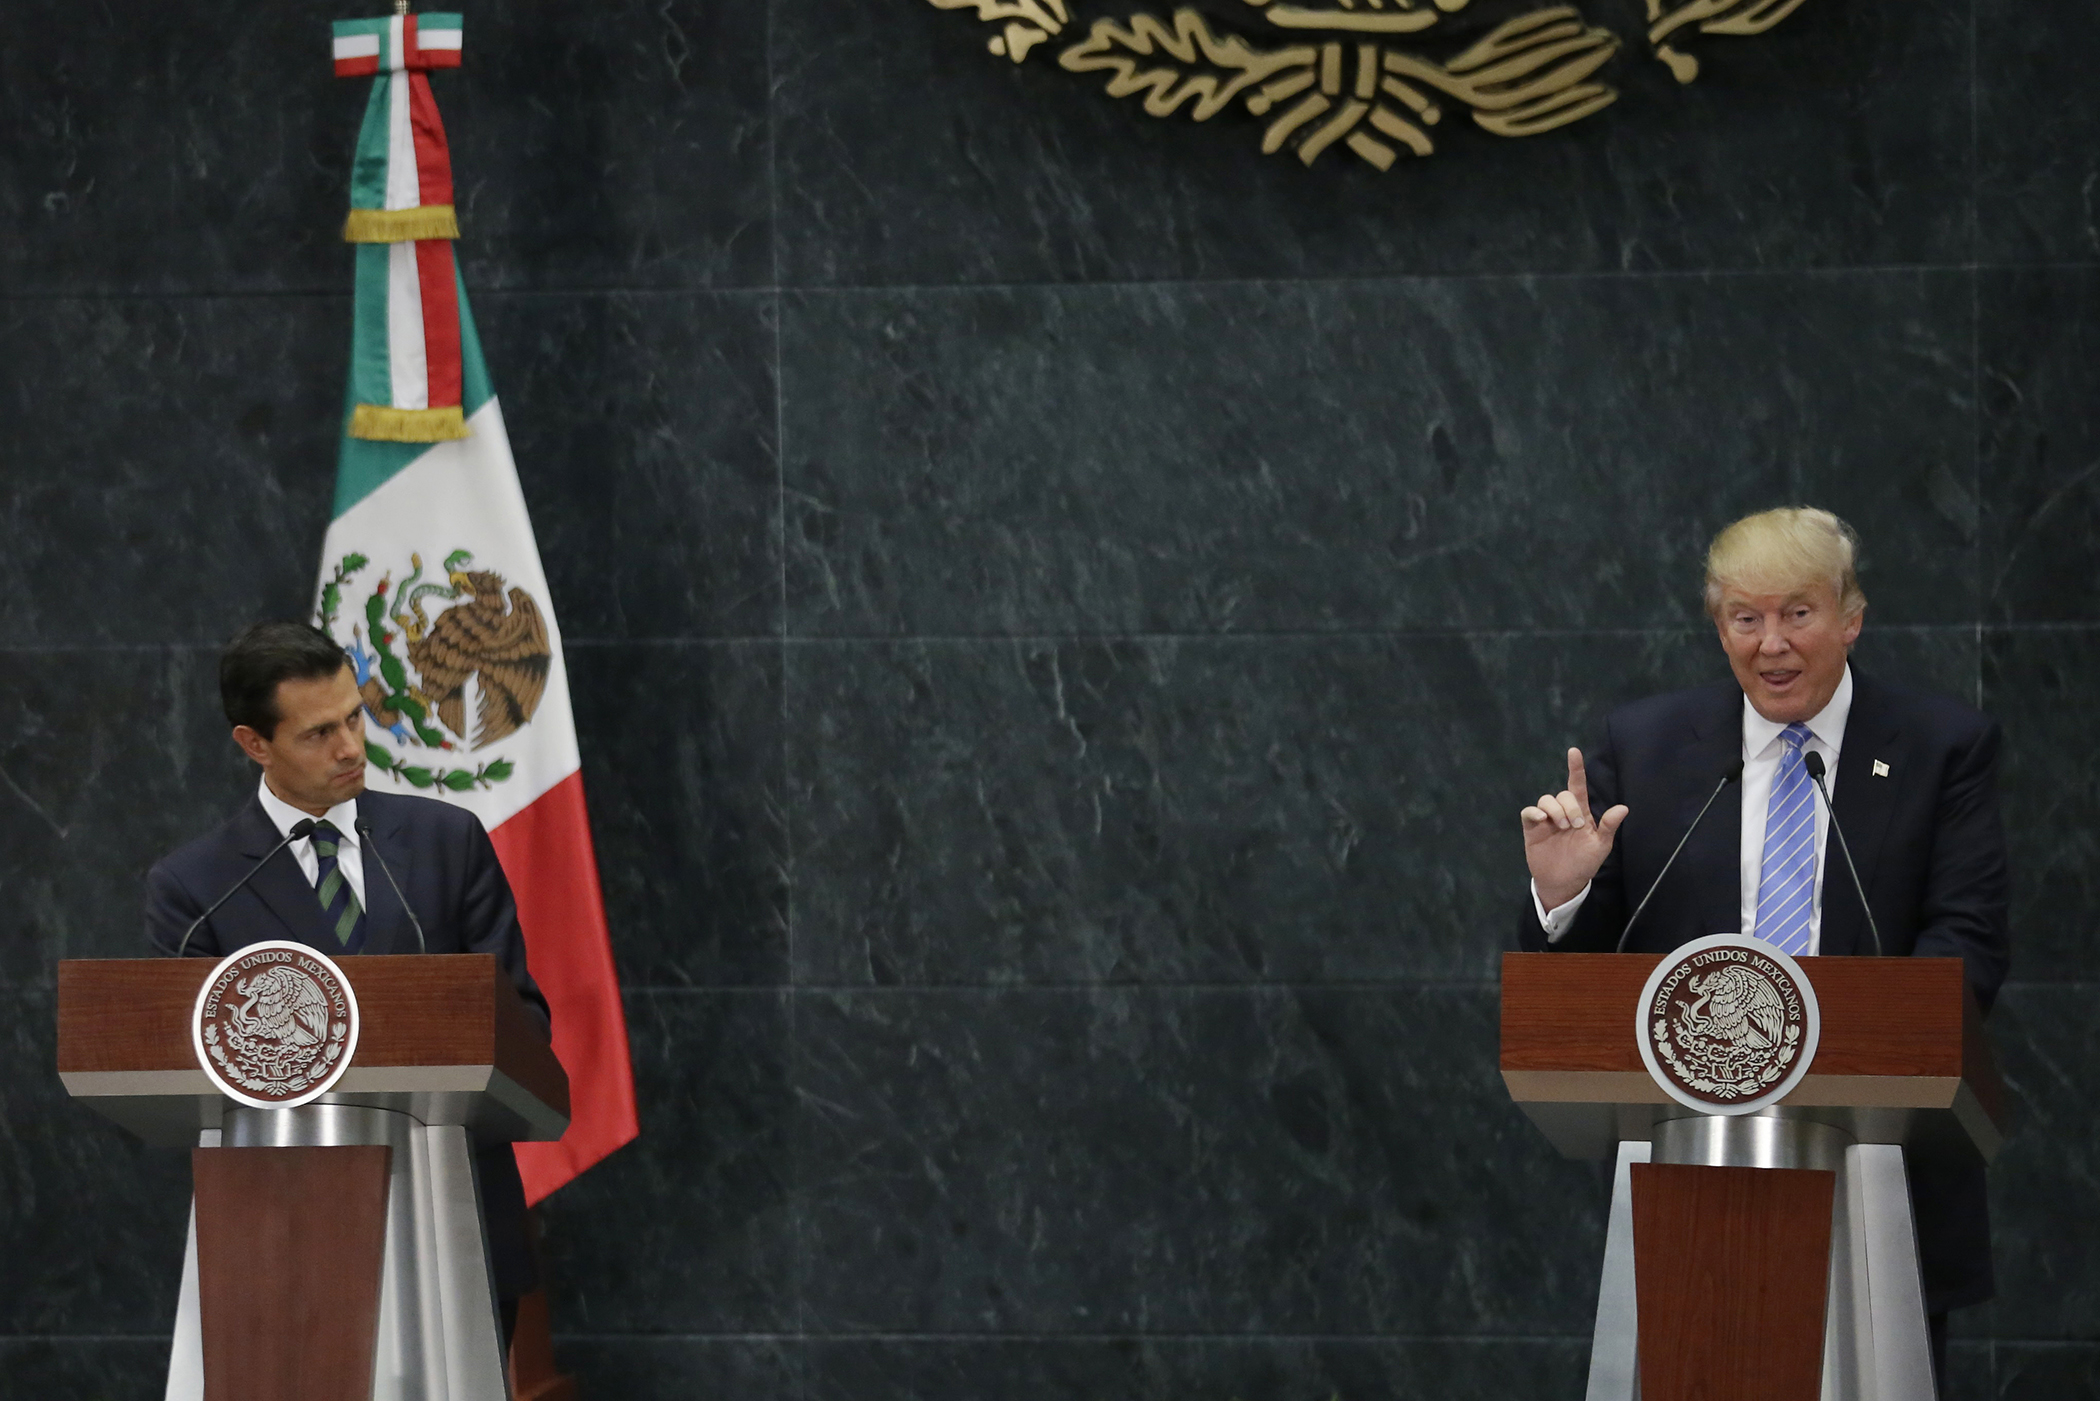 U.S. Republican presidential nominee Donald Trump and Mexico's President Enrique Pena Nieto give a press conference in Mexico City in August. (Henry Romero-Reuters)